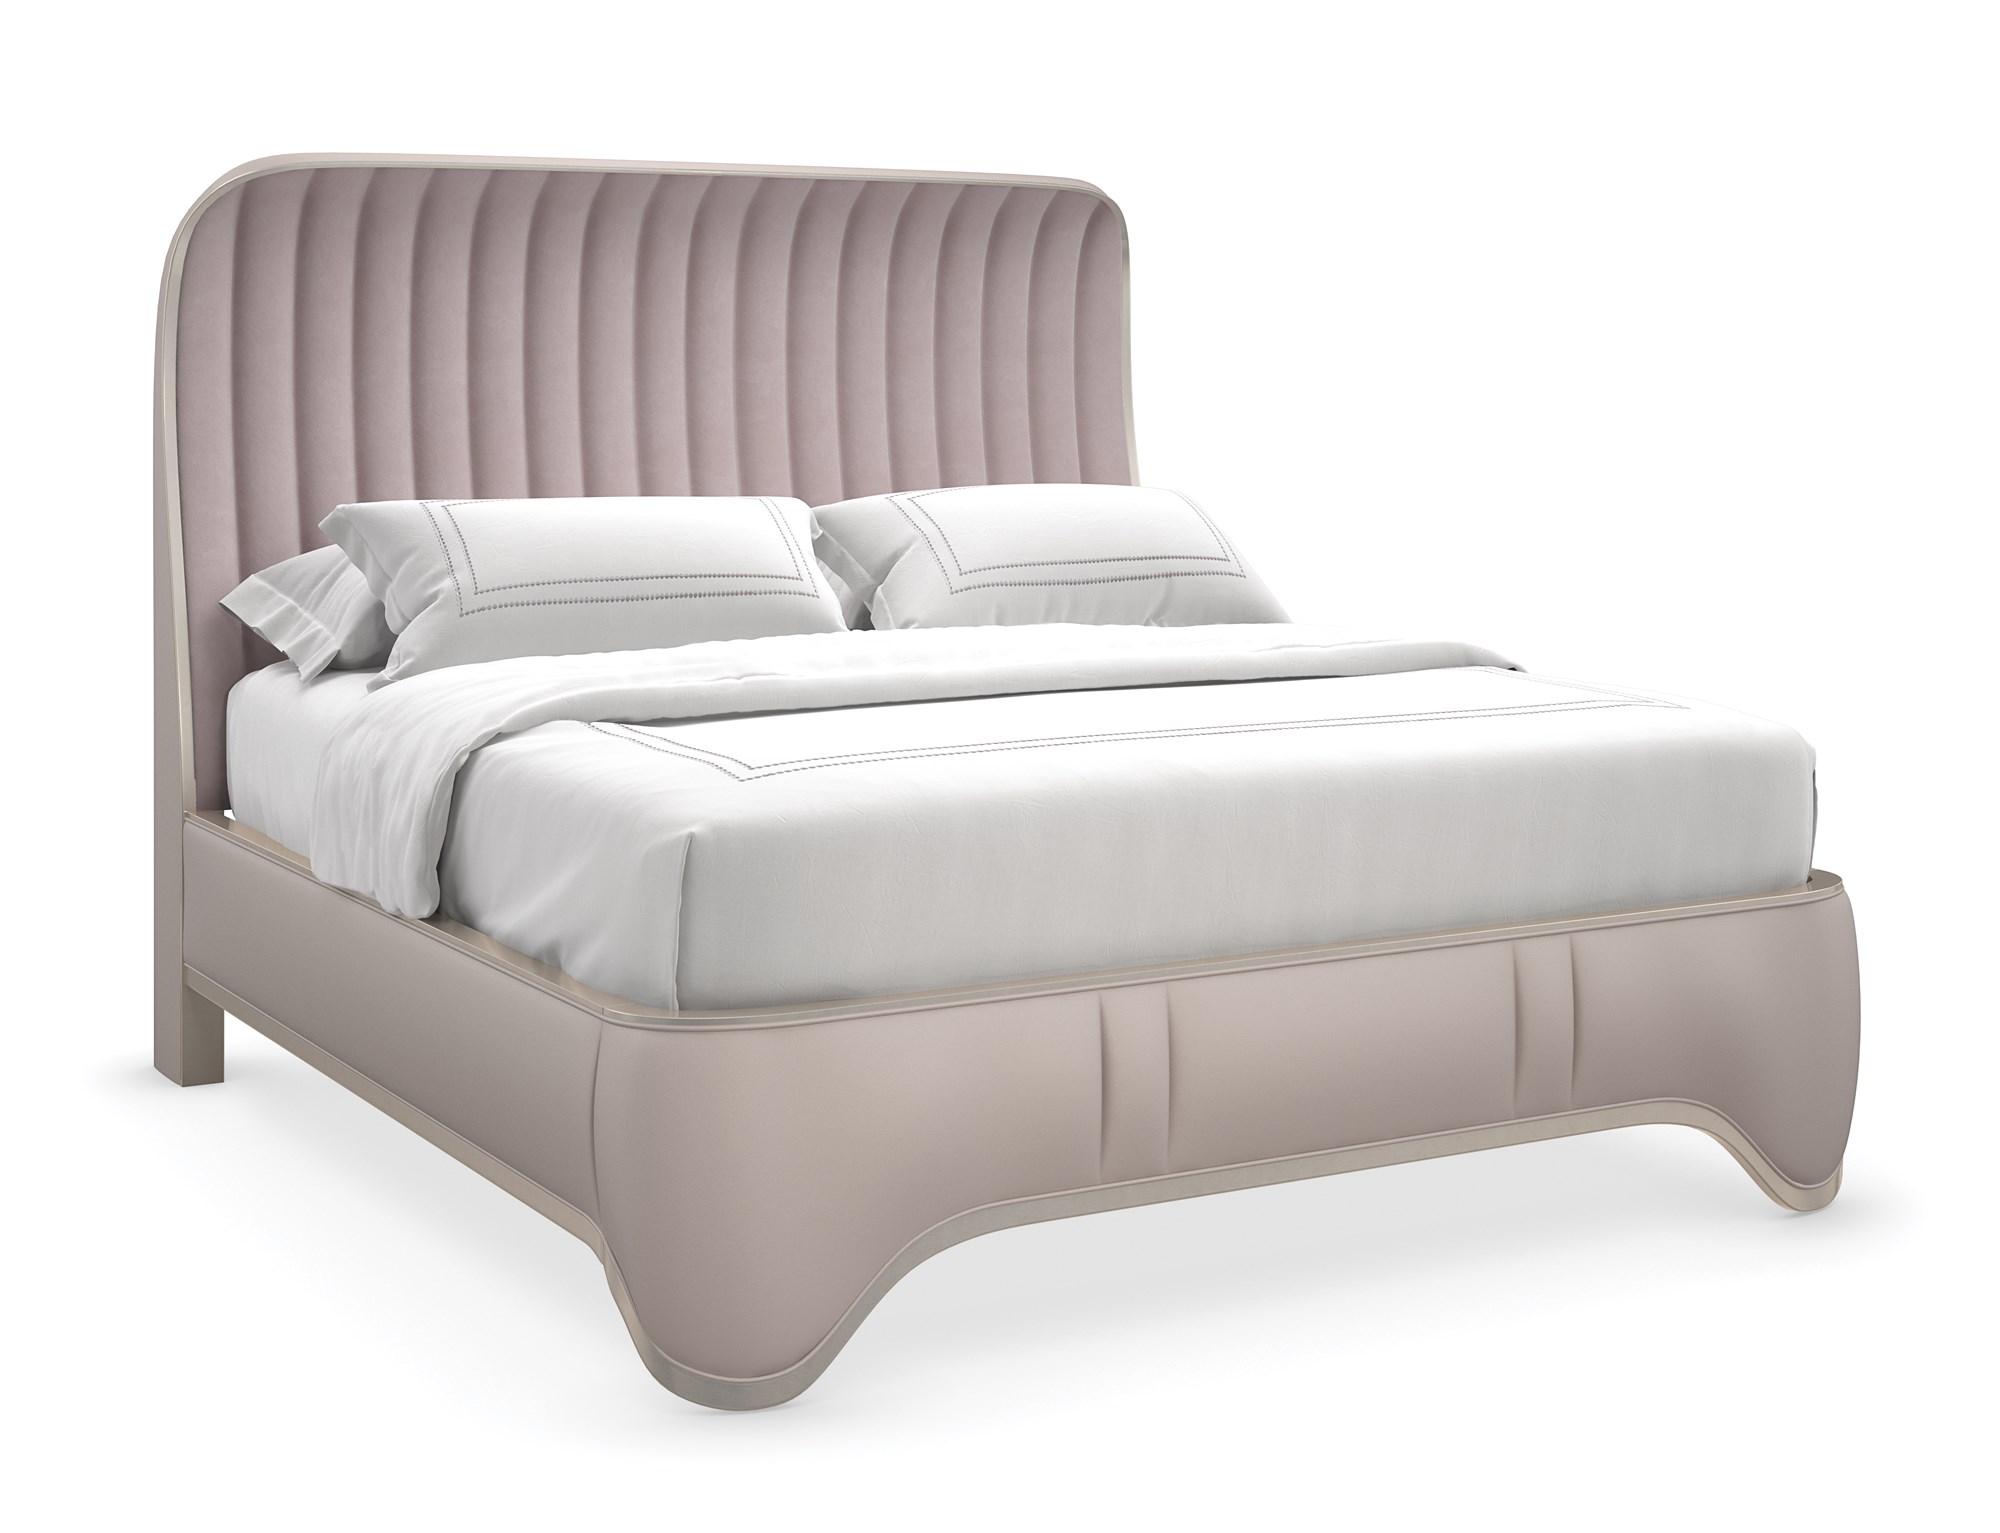 Contemporary Platform Bed THE OXFORD UPH QUEEN BED C103-422-101 in Metallic Fabric